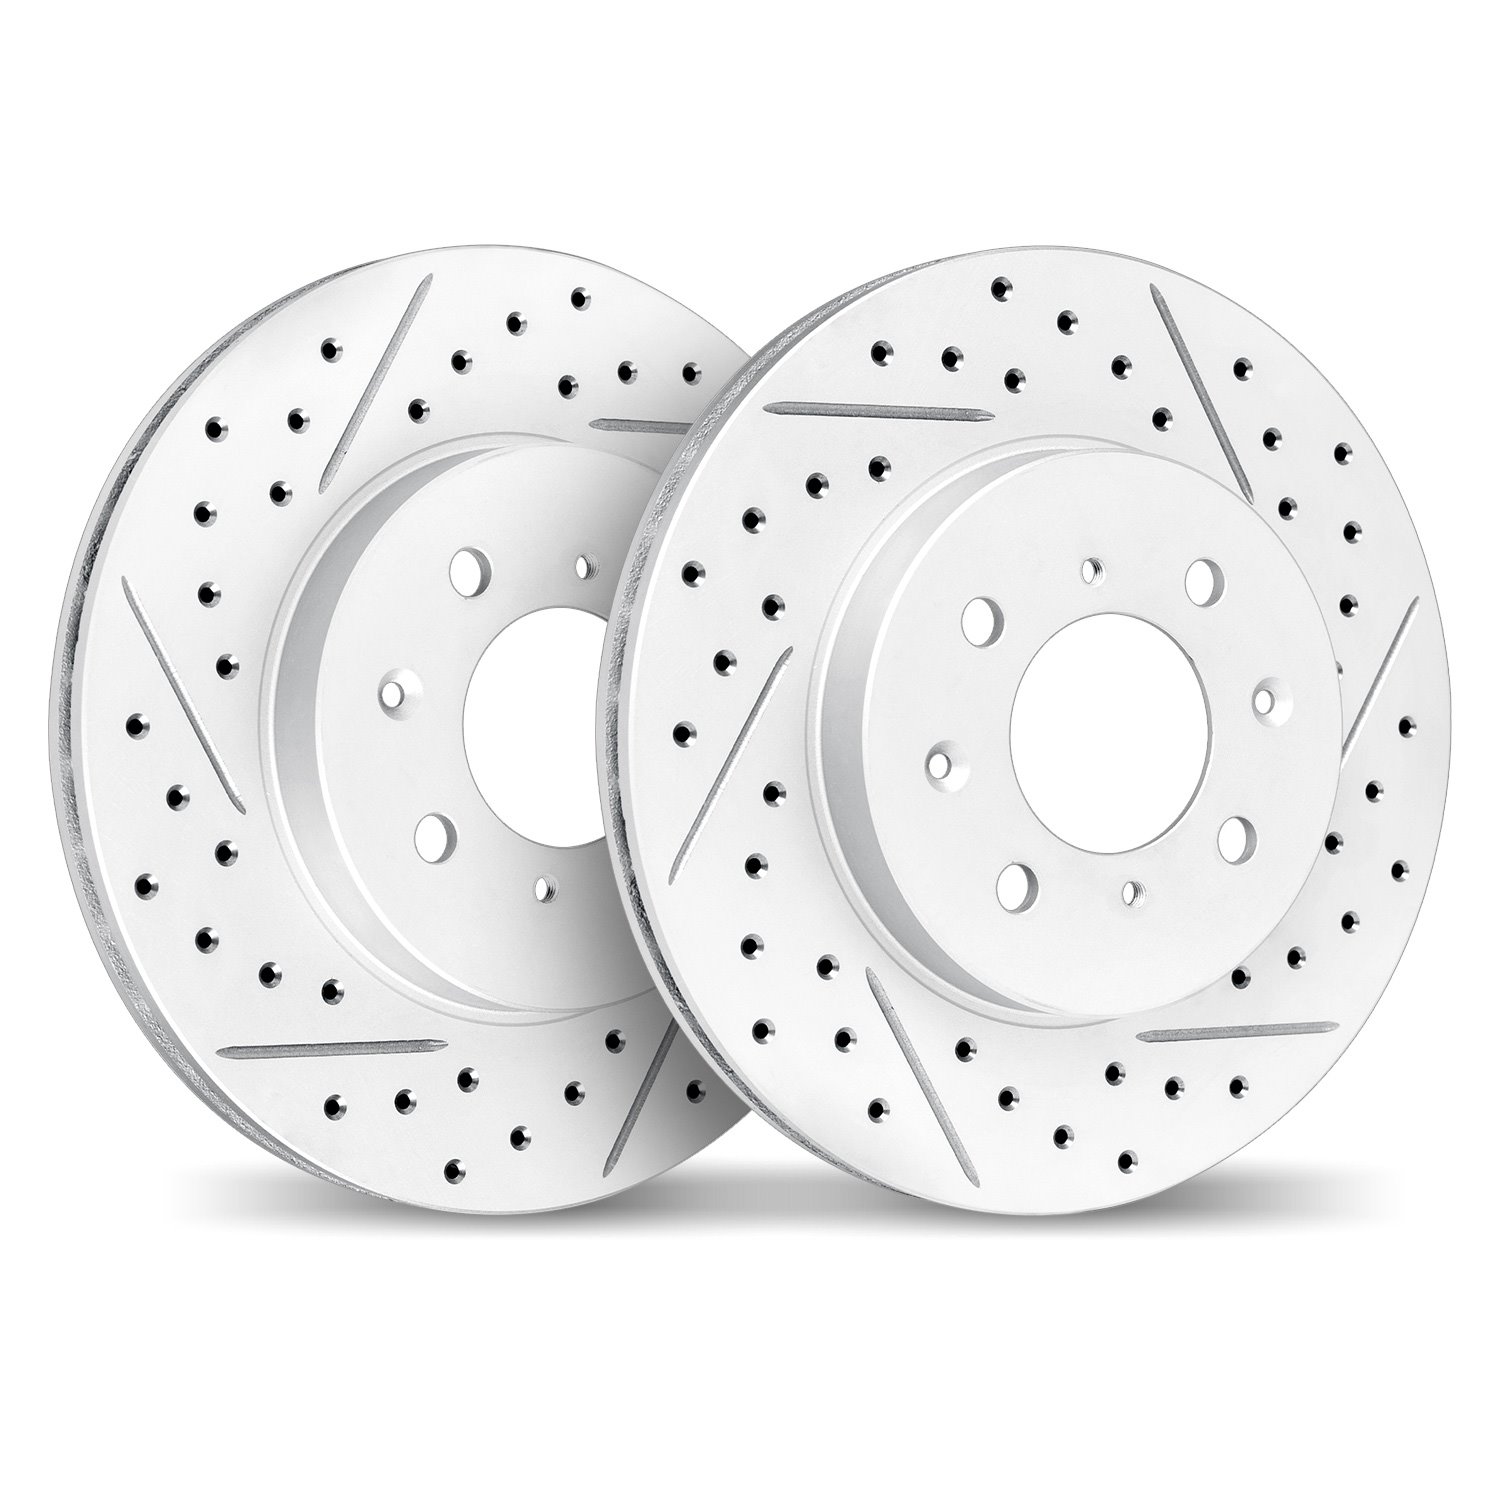 2002-67030 Geoperformance Drilled/Slotted Brake Rotors, Fits Select Infiniti/Nissan, Position: Front